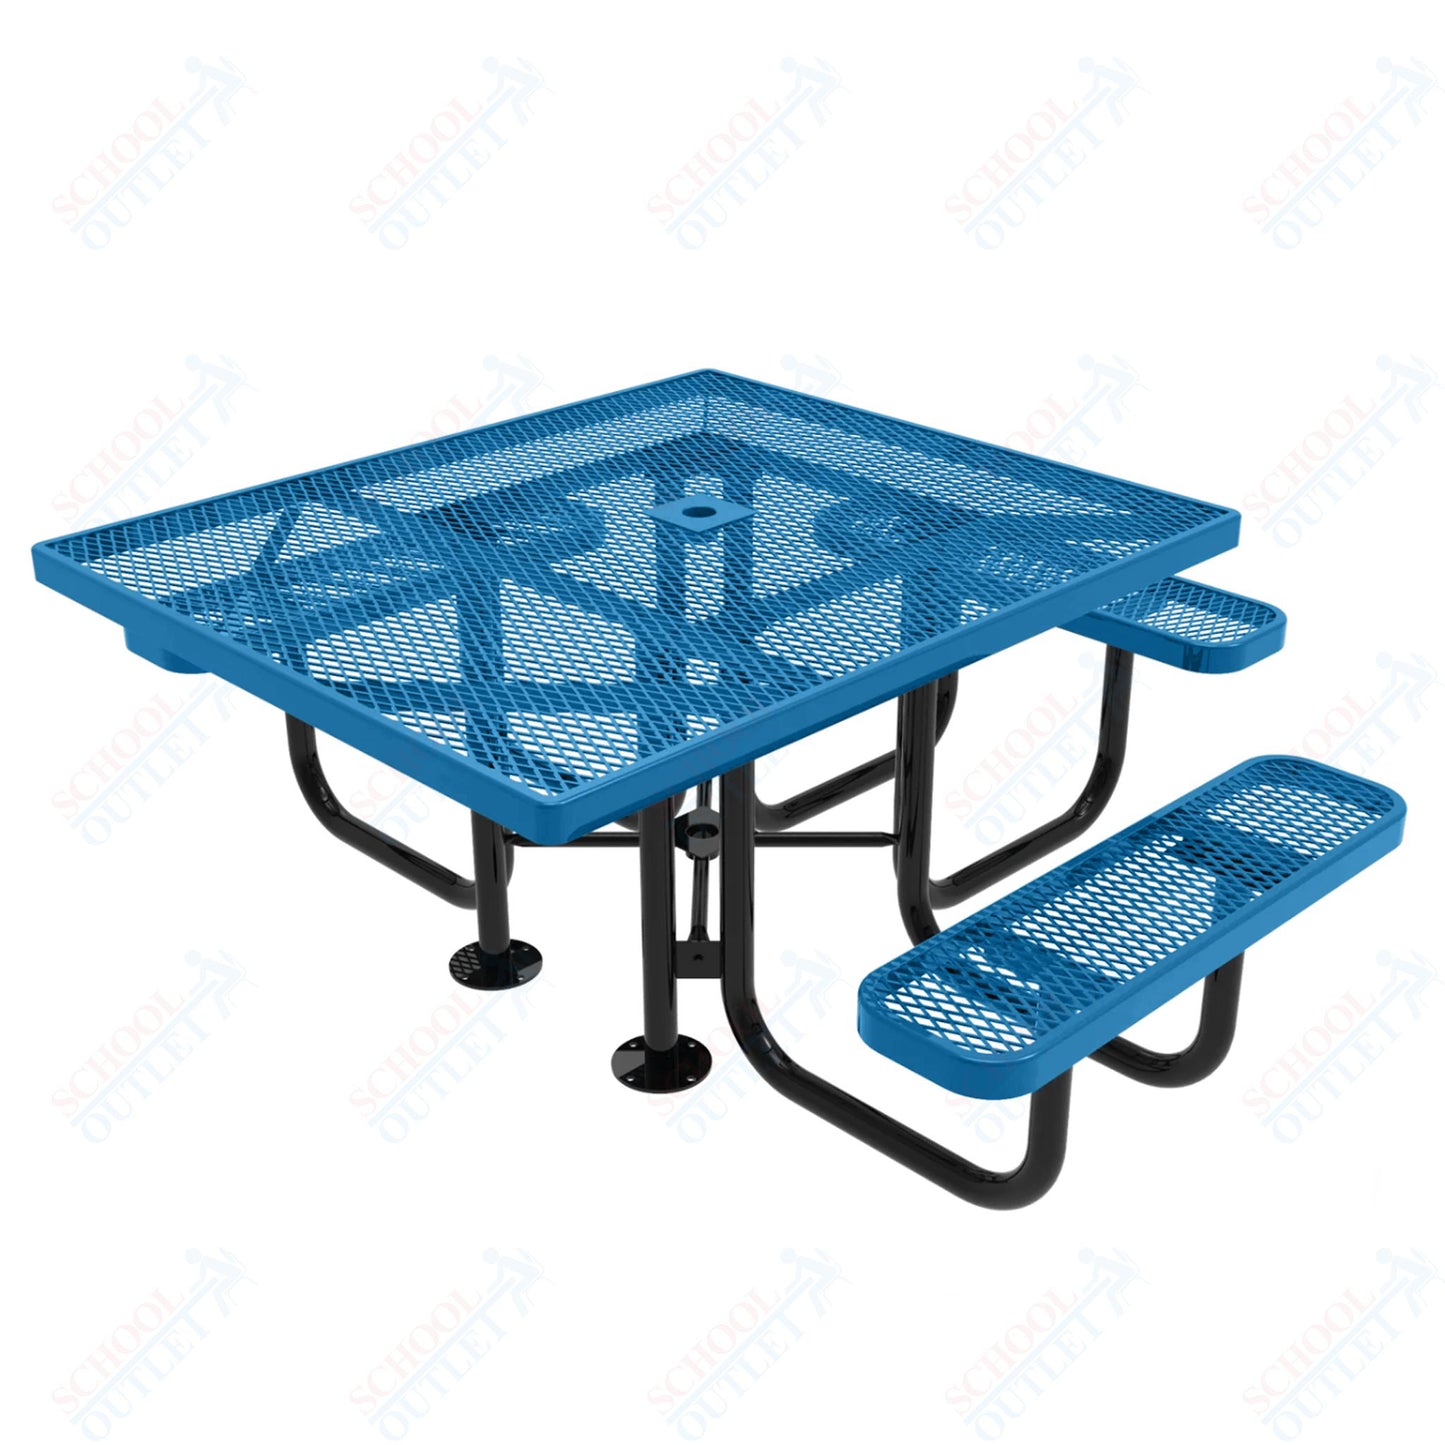 MyTcoat MYT-TSQ46 46″ Square Portable Picnic Table with 3 Seat and ADA Accessible (77"W x 69.5"D x 30"H)